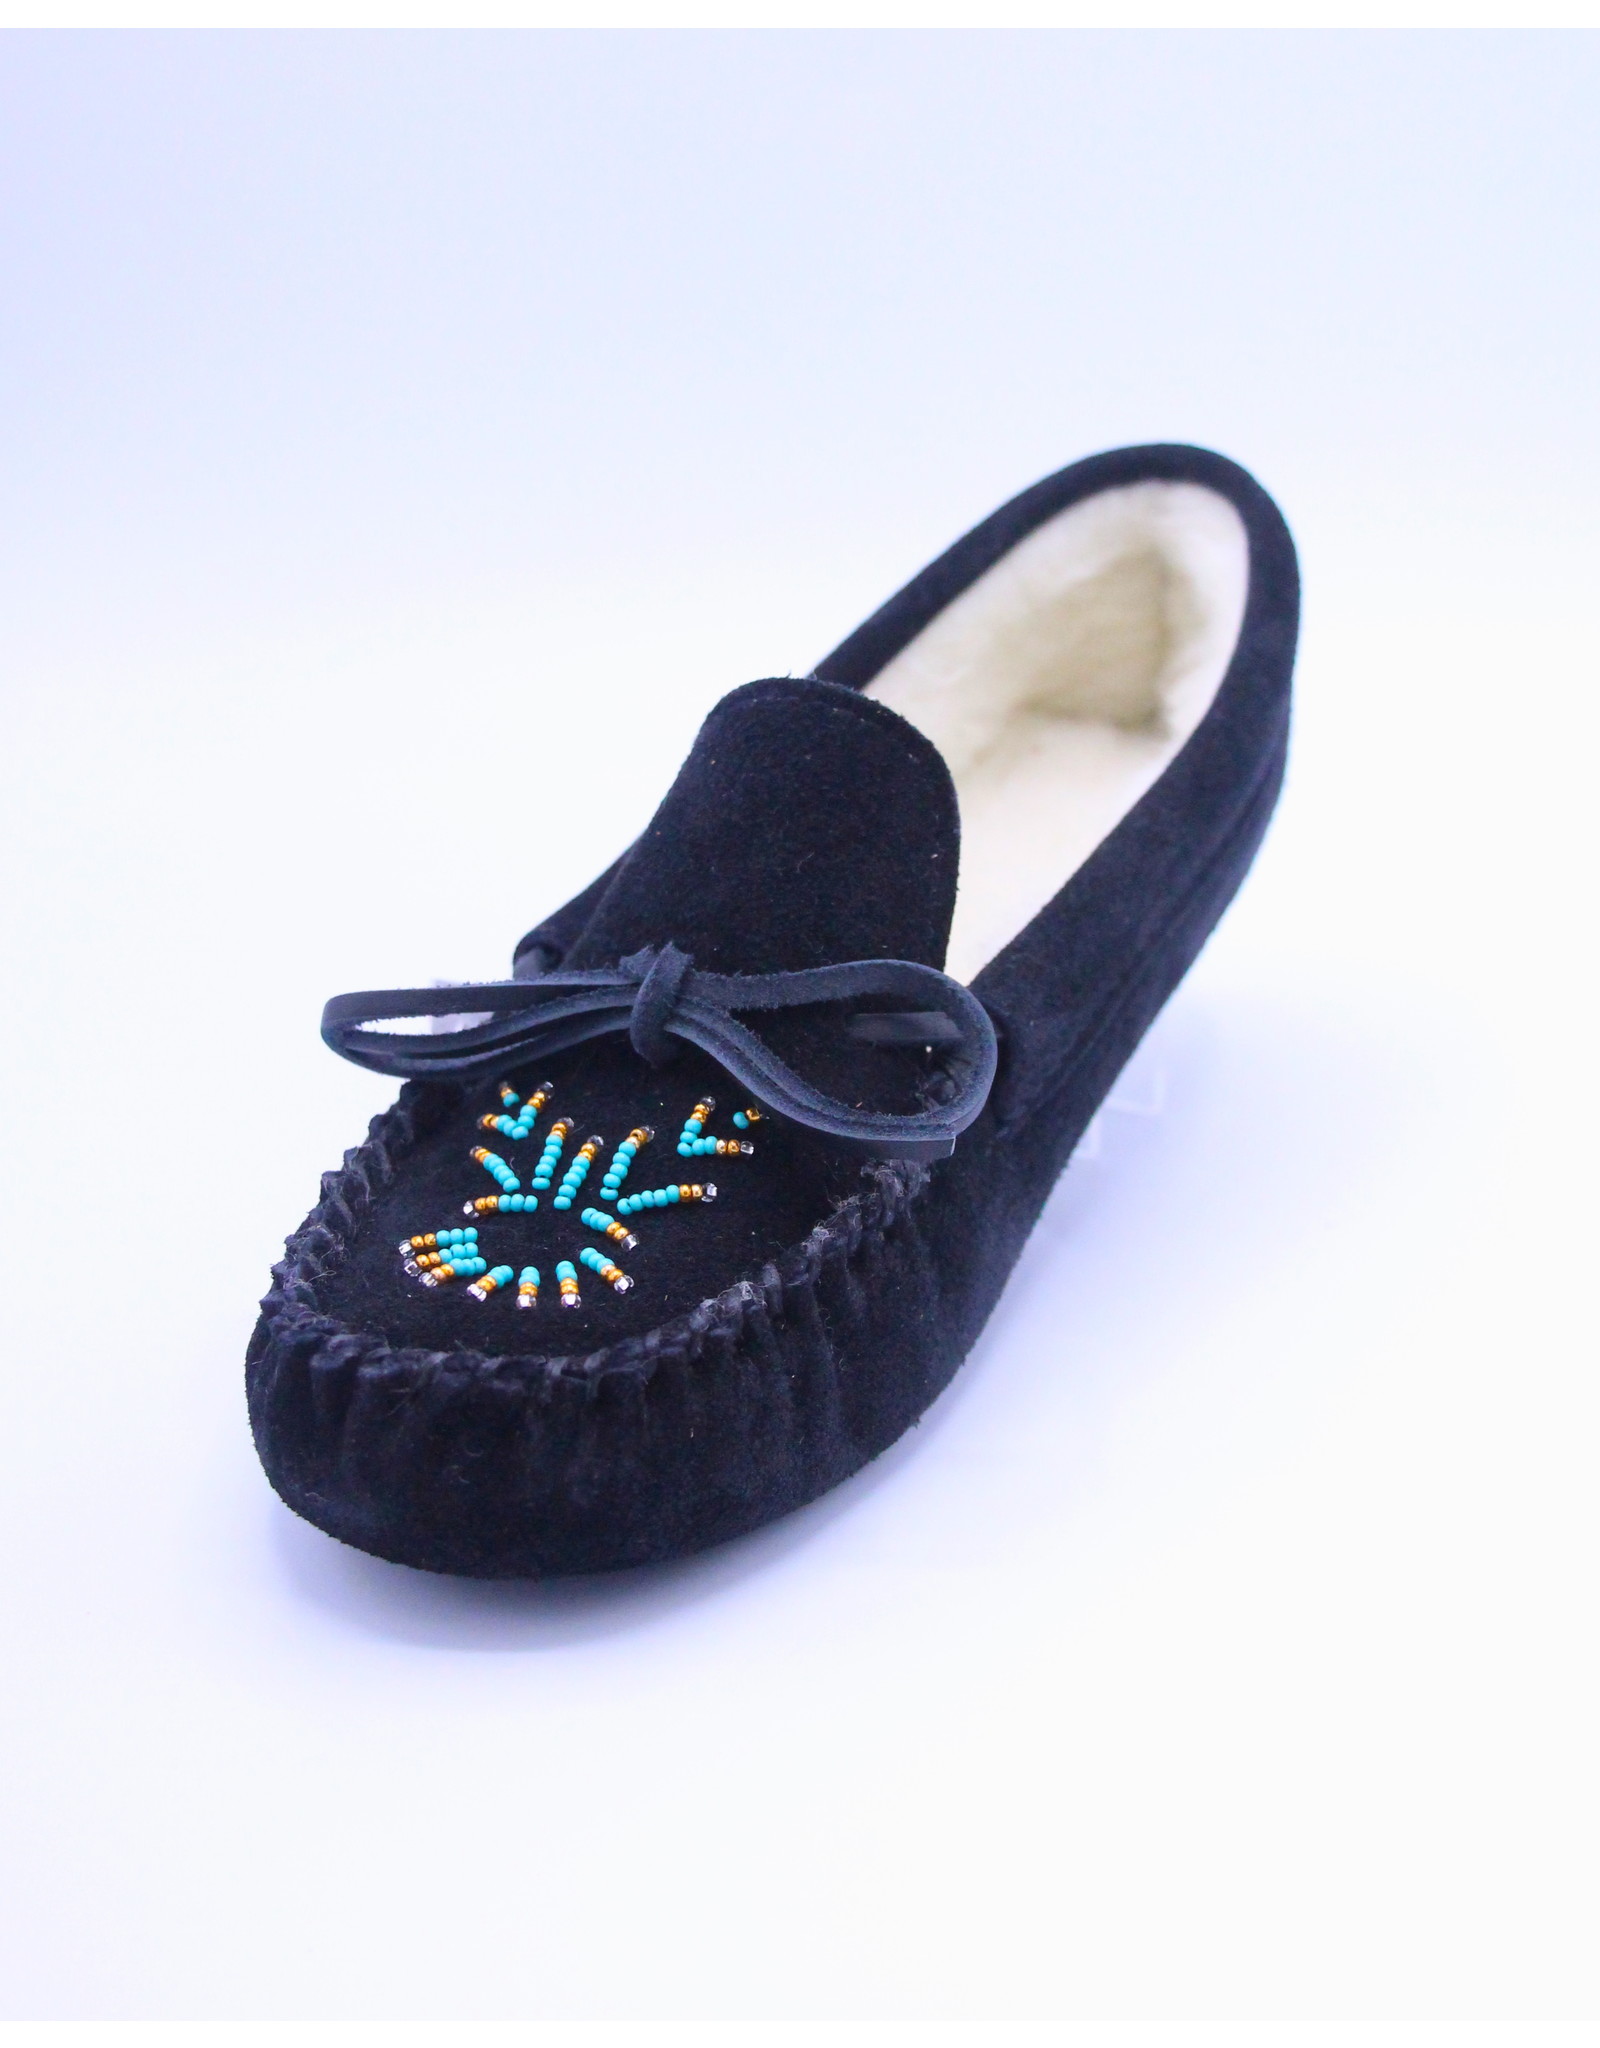 Ladies Moccasin Slippers Lined and Beaded - Black